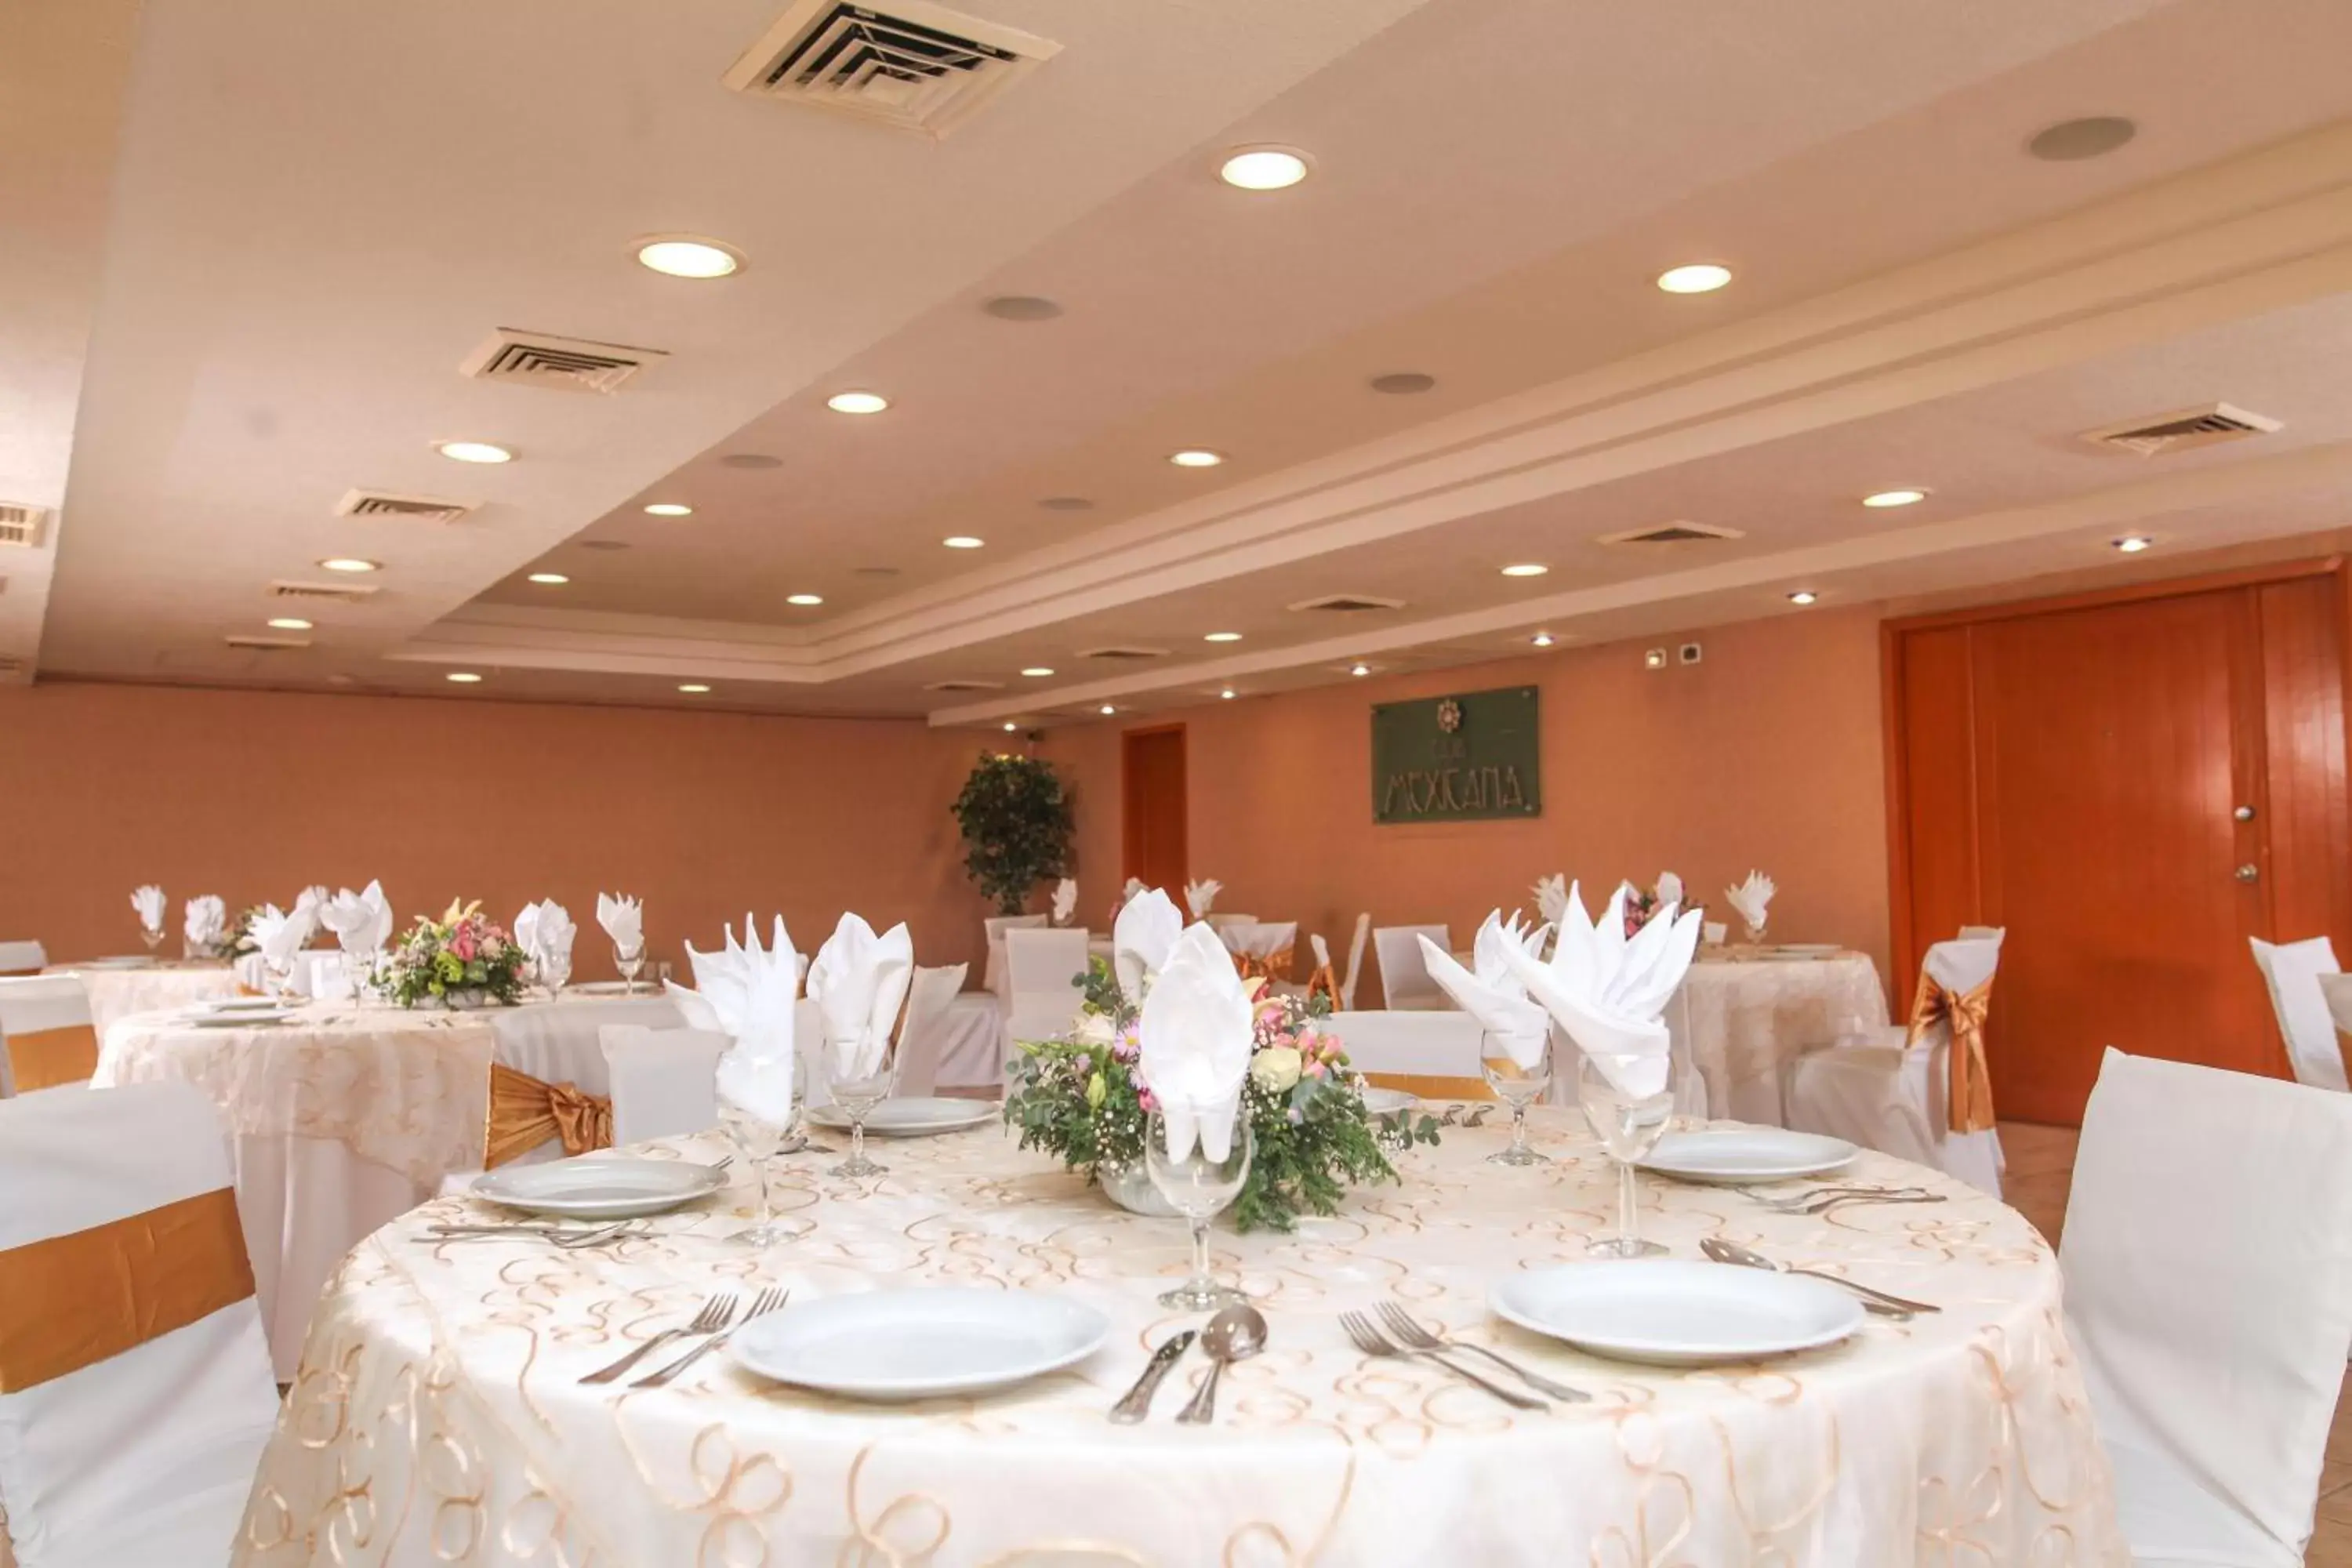 Meeting/conference room, Banquet Facilities in Casa Mexicana Cozumel